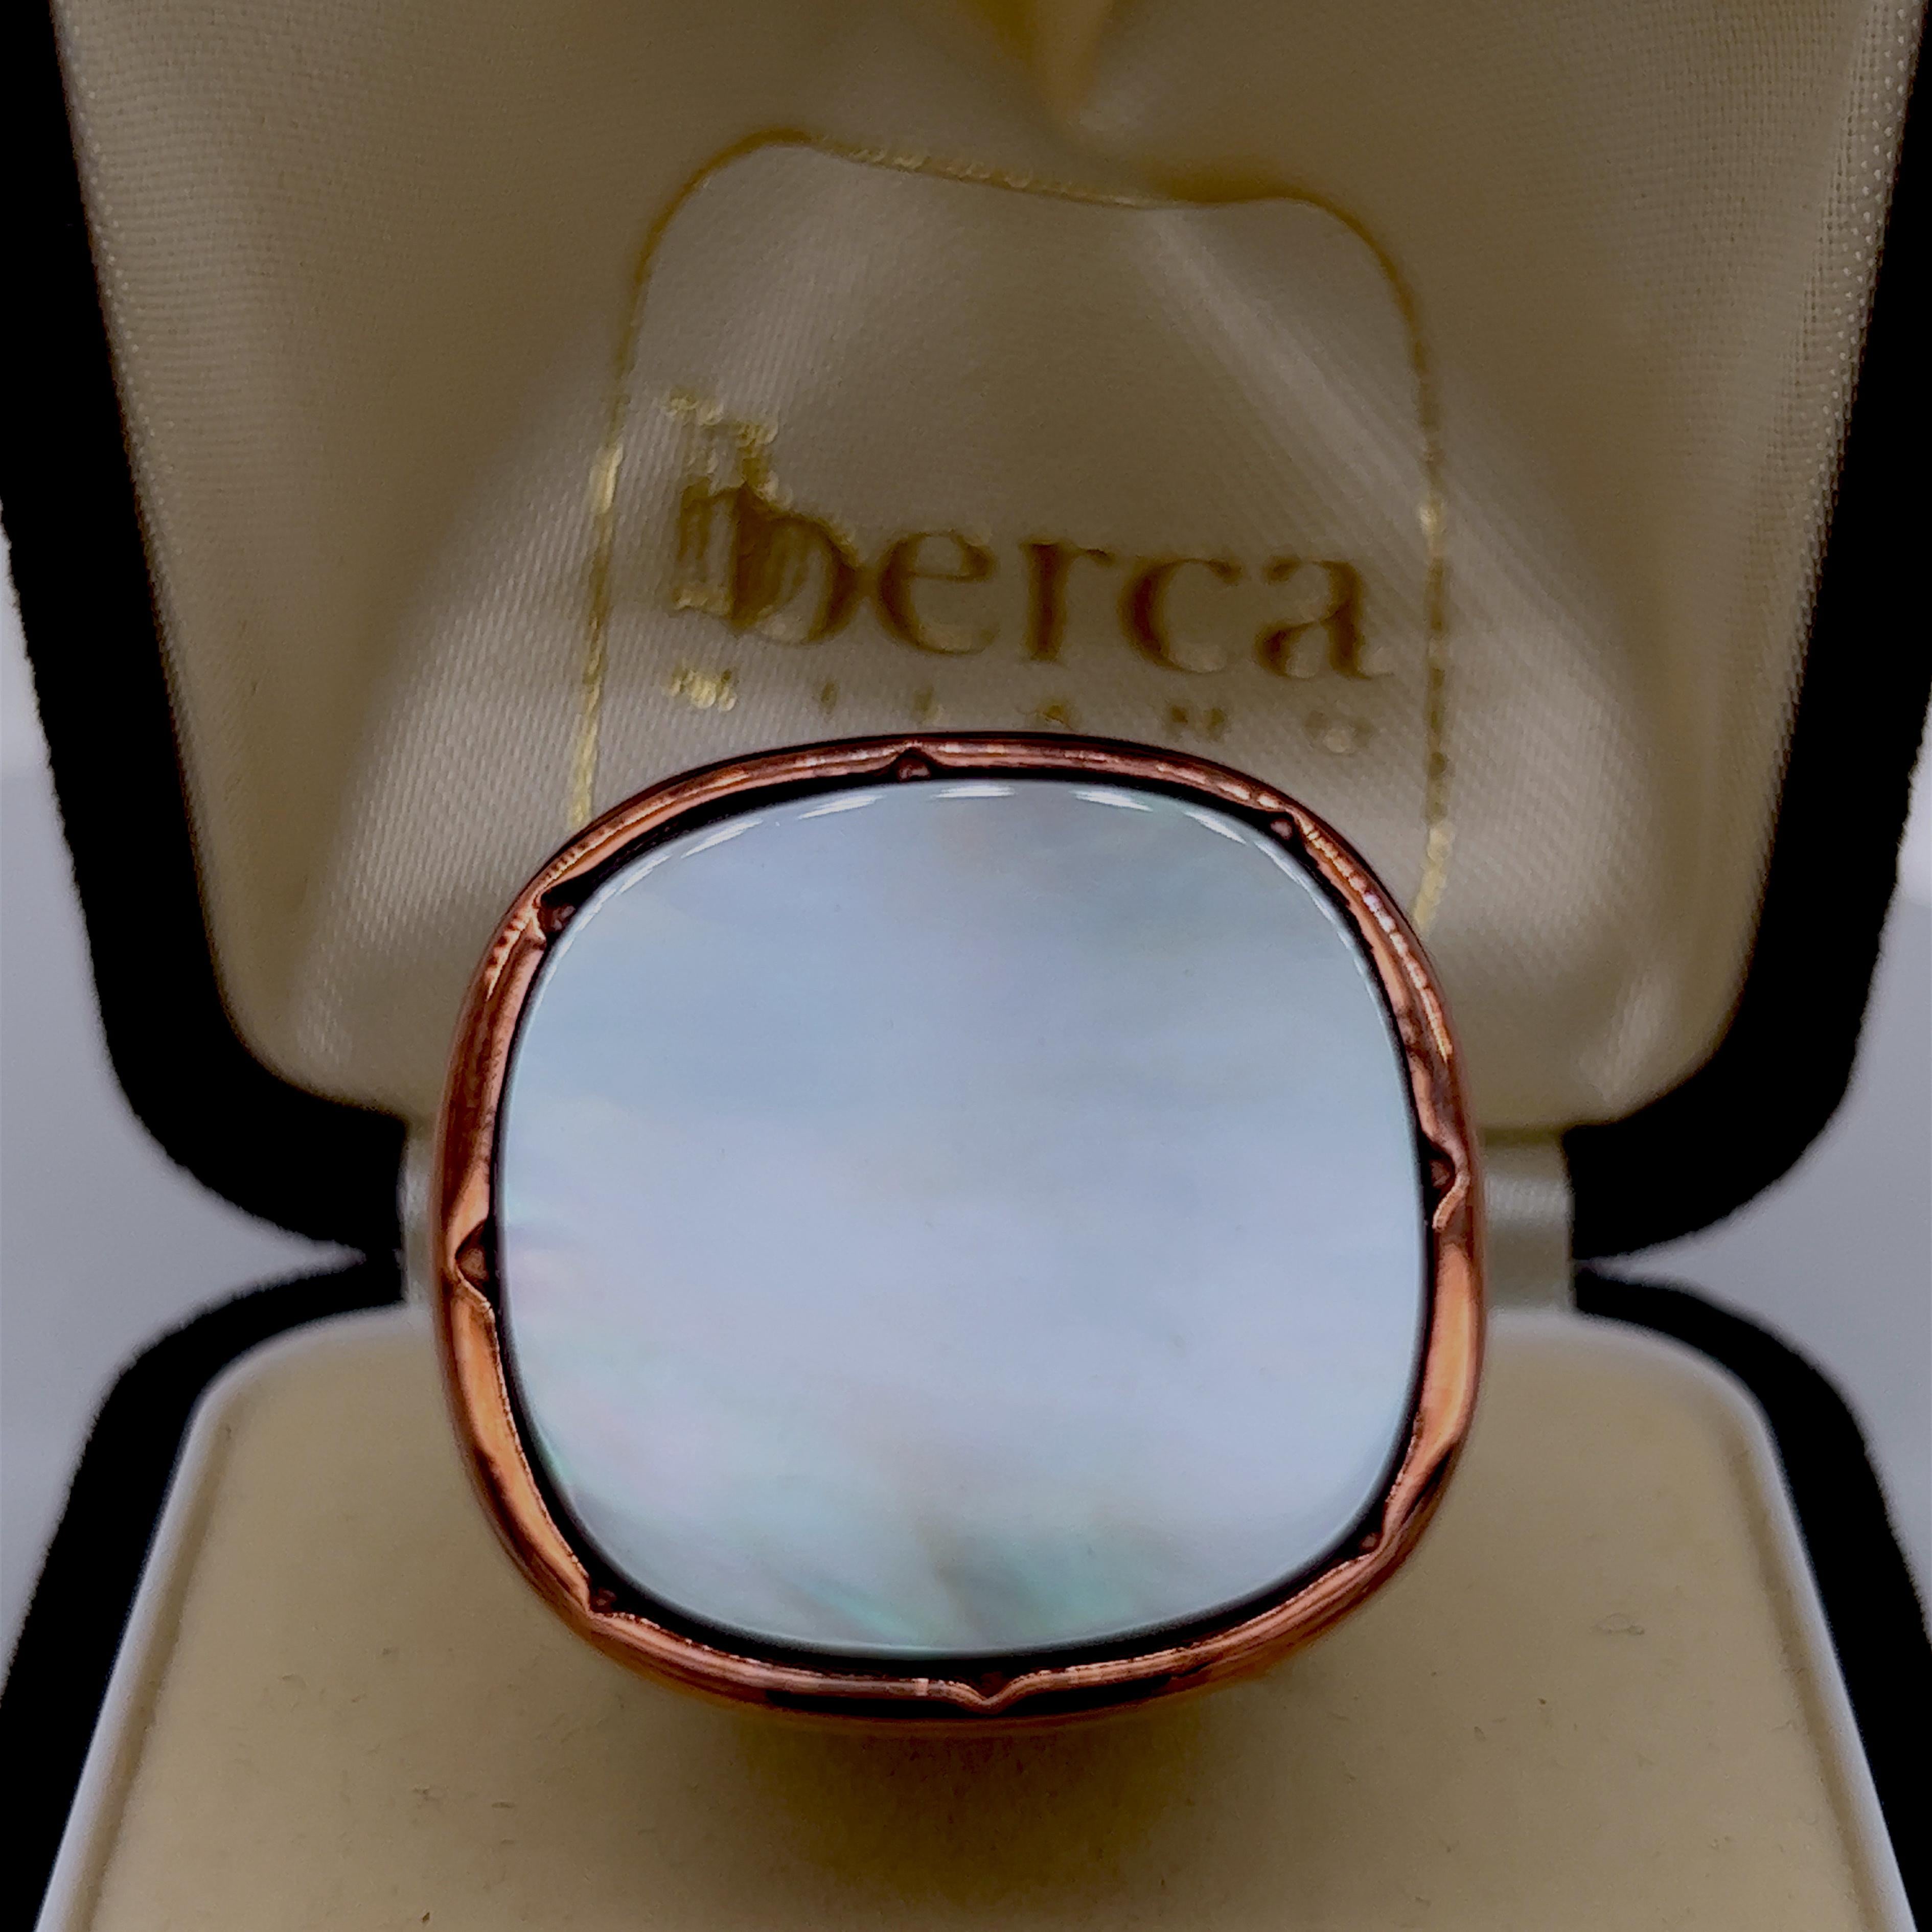 One-of-a-kind, Contemporary, Chic yet Timeless Cocktail Ring Featuring an iridescent Grey Hand Enameled Leaf (0.850x0.850in) in a beautifully Handcrafted Hand Engraved Solid Rose Gold Plated Sterling Silver Setting.
The color-changing of Grey Enamel